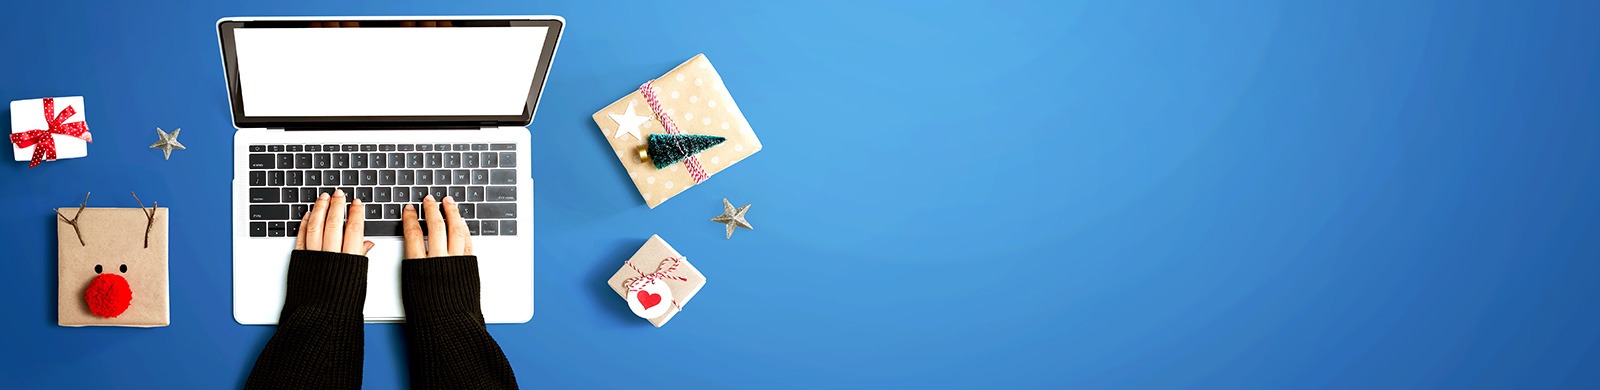 blue background photo of white laptop with hands, black sweater, four holiday presents